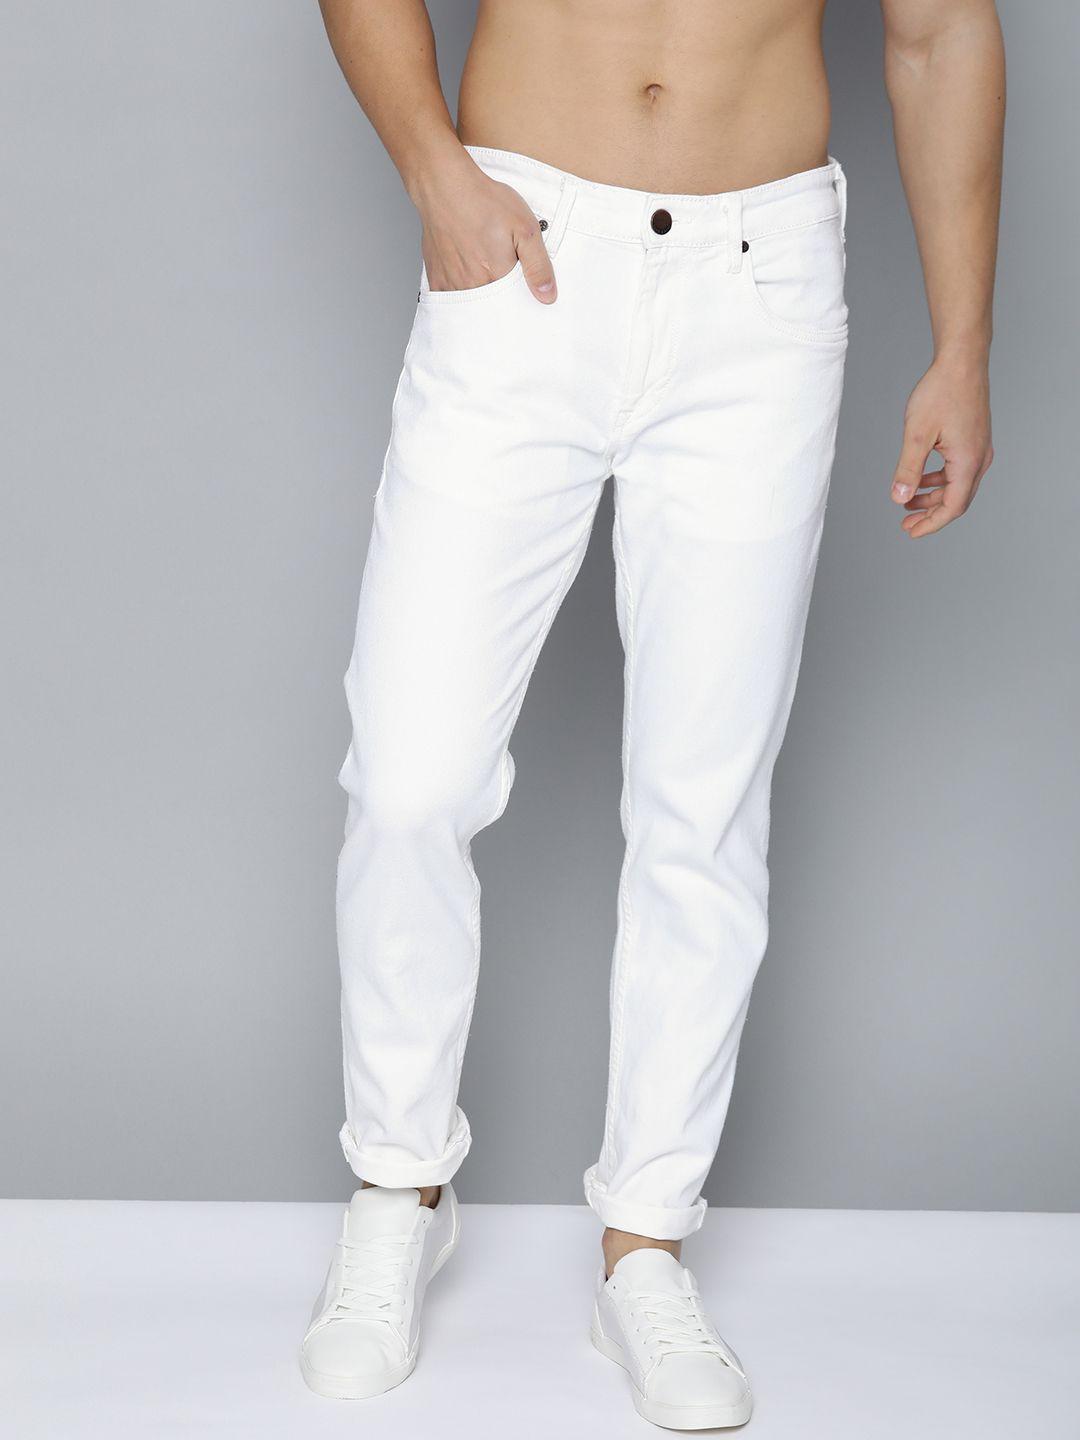 here&now men white ankle slim fit low-rise clean look stretchable jeans